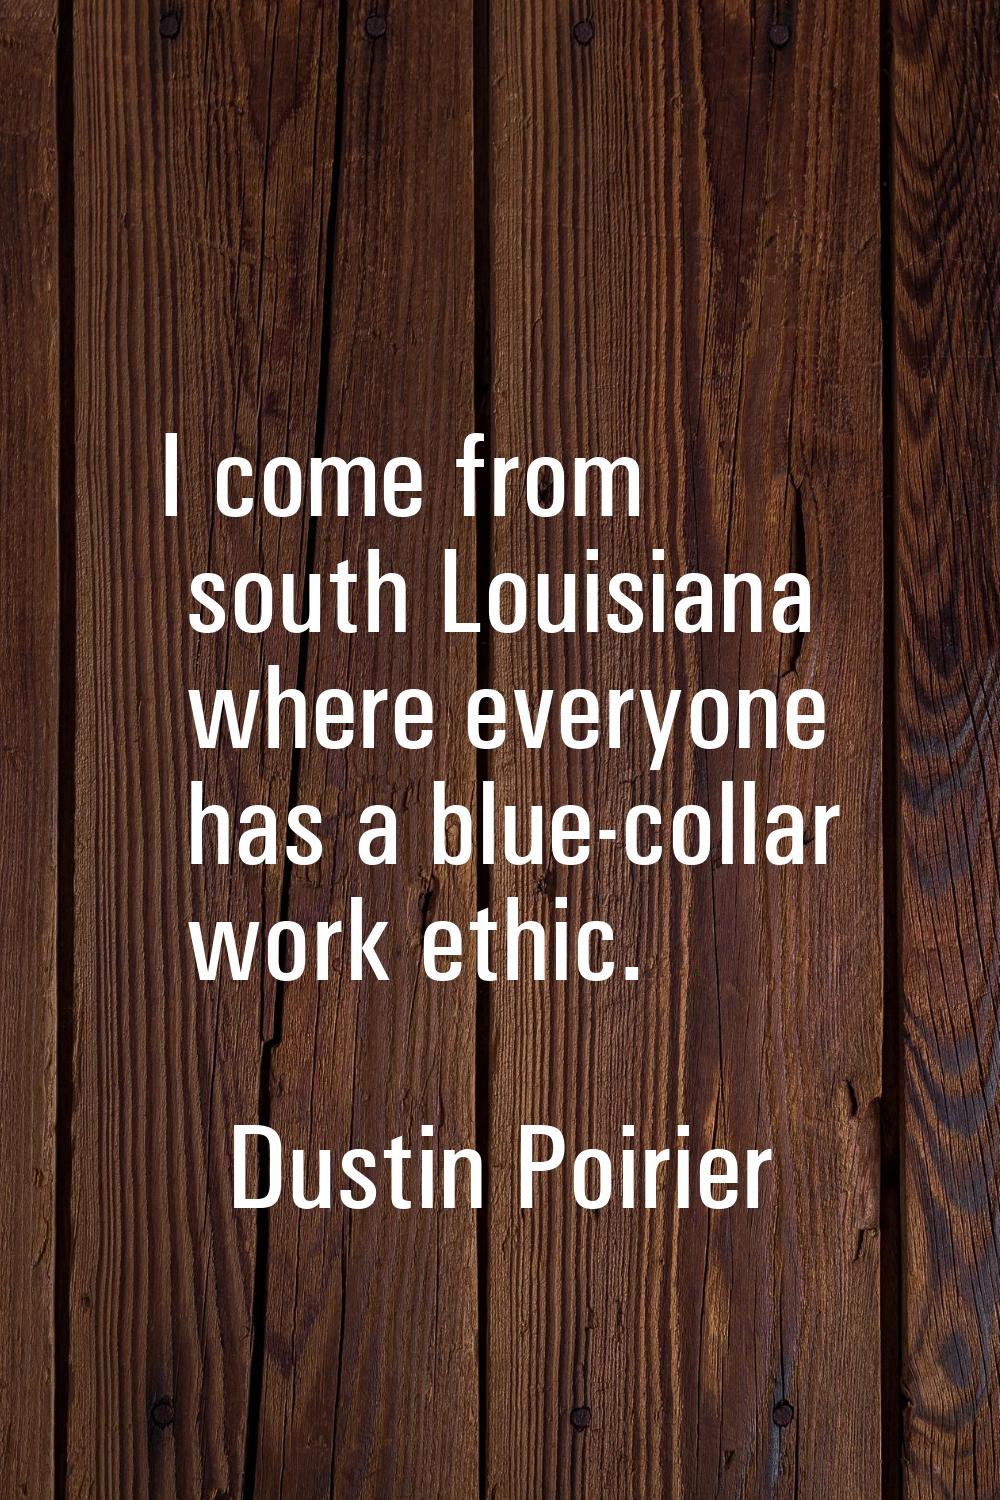 I come from south Louisiana where everyone has a blue-collar work ethic.